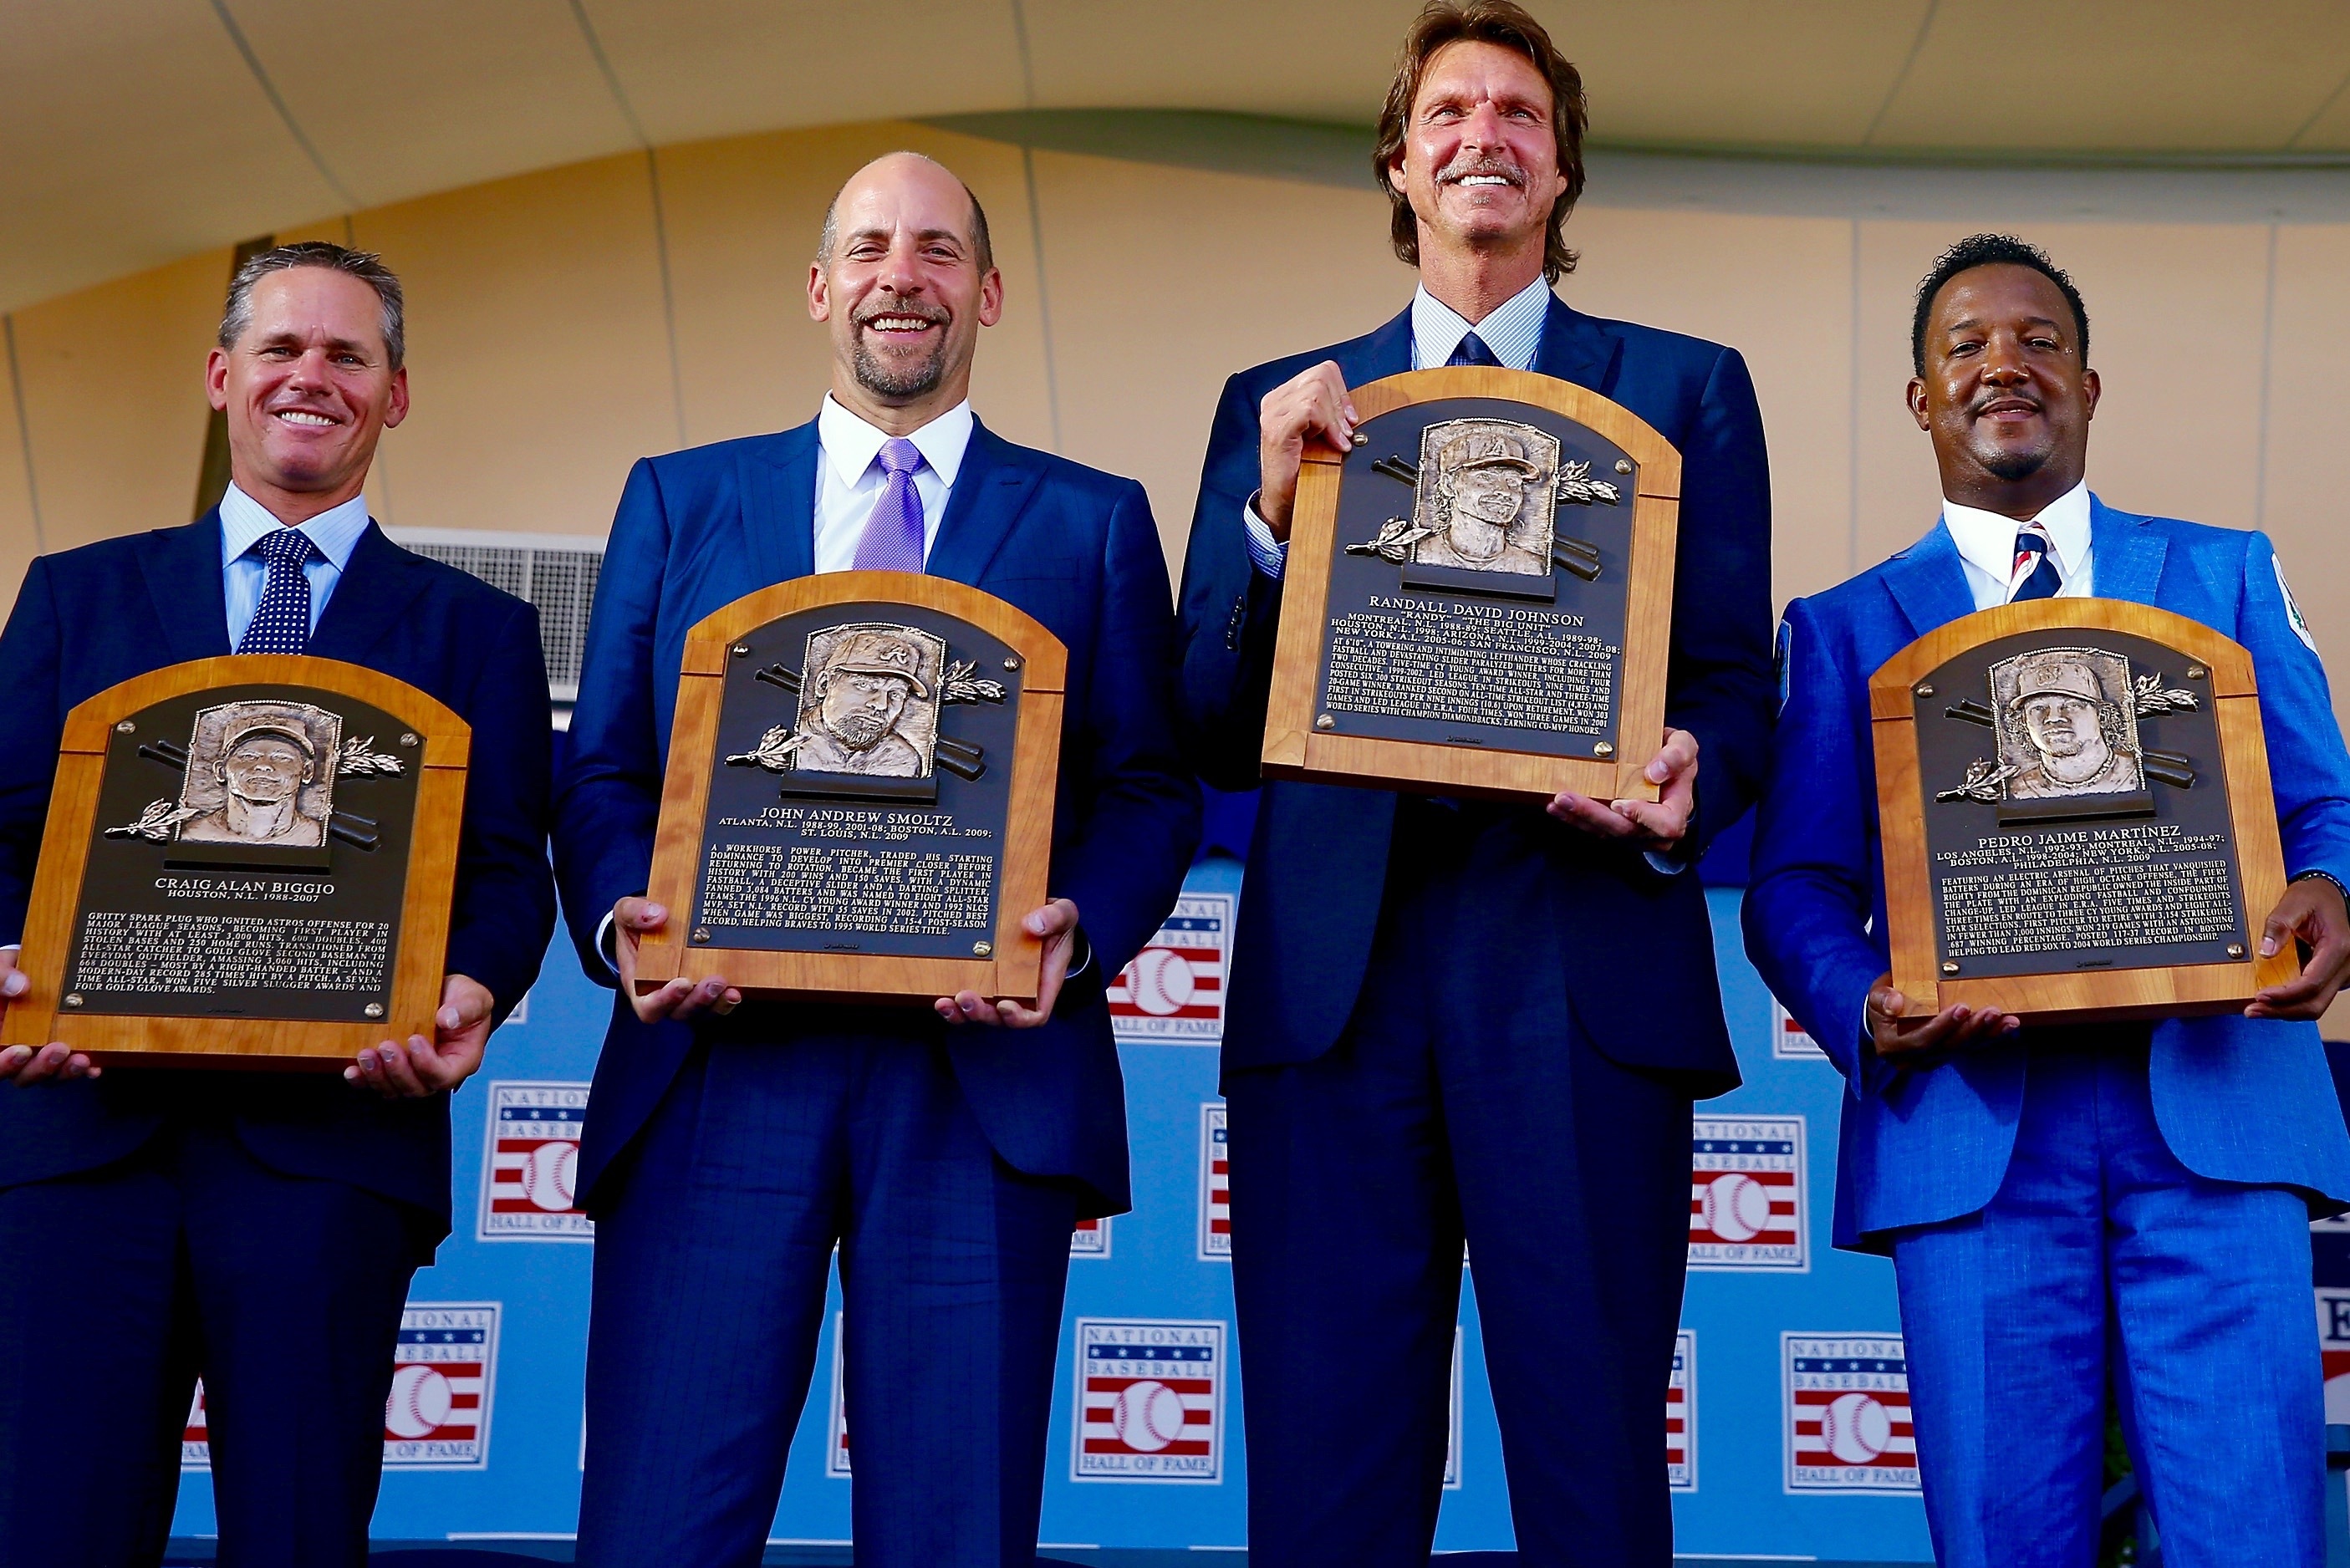 John Smoltz Wears a Wig During Baseball Hall of Fame Induction [VIDEO]